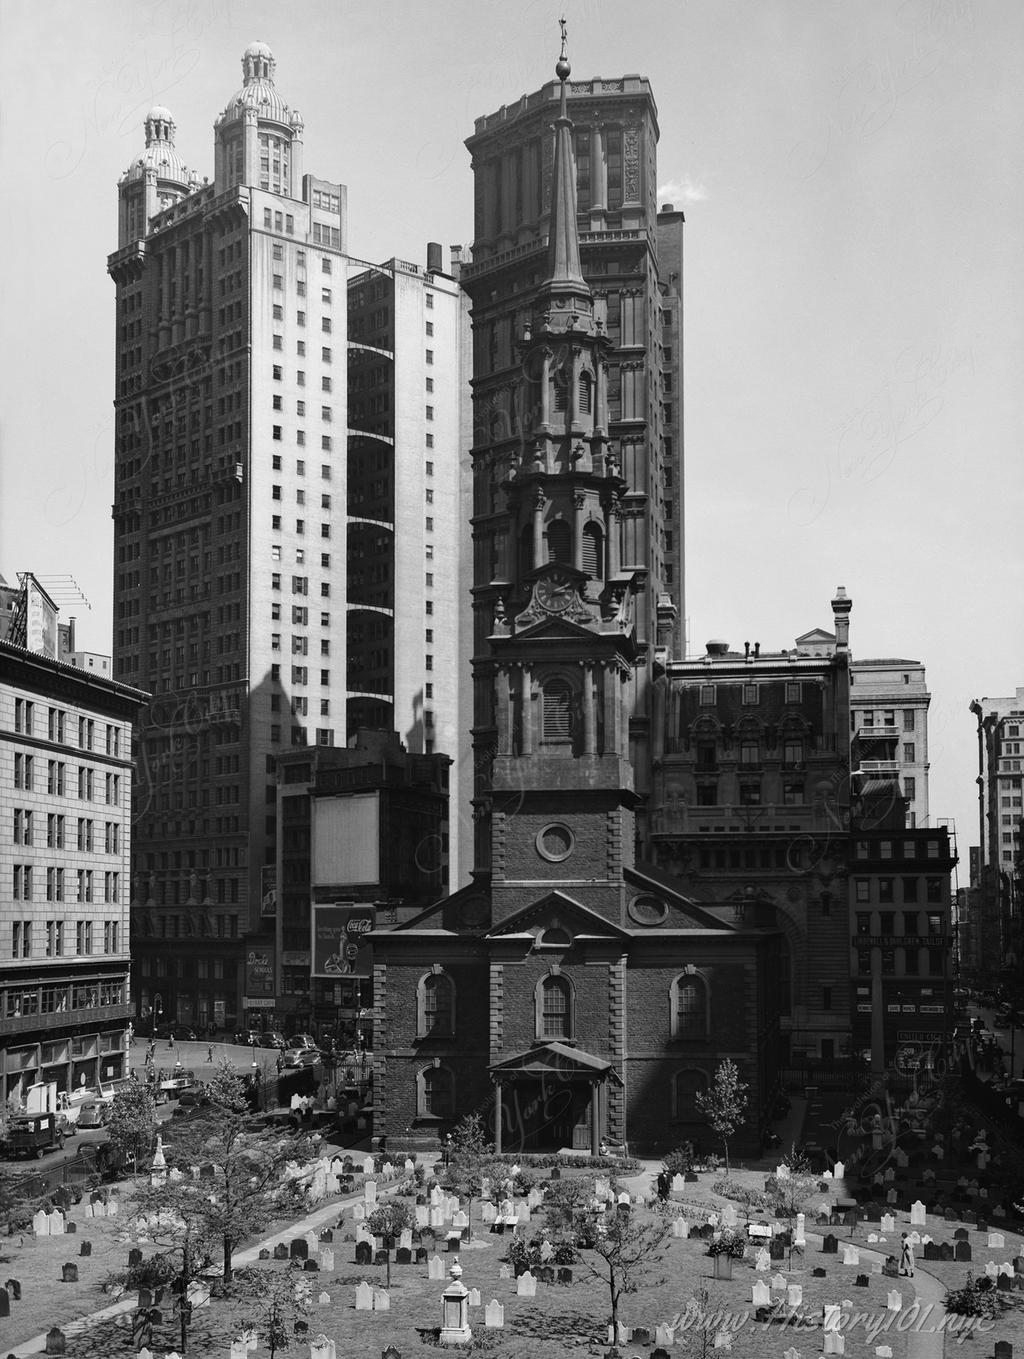 Historic American Buildings Survey photograph showing the church yard of St. Paul's Chapel from the west, framed by Broadway & Fulton Streets.